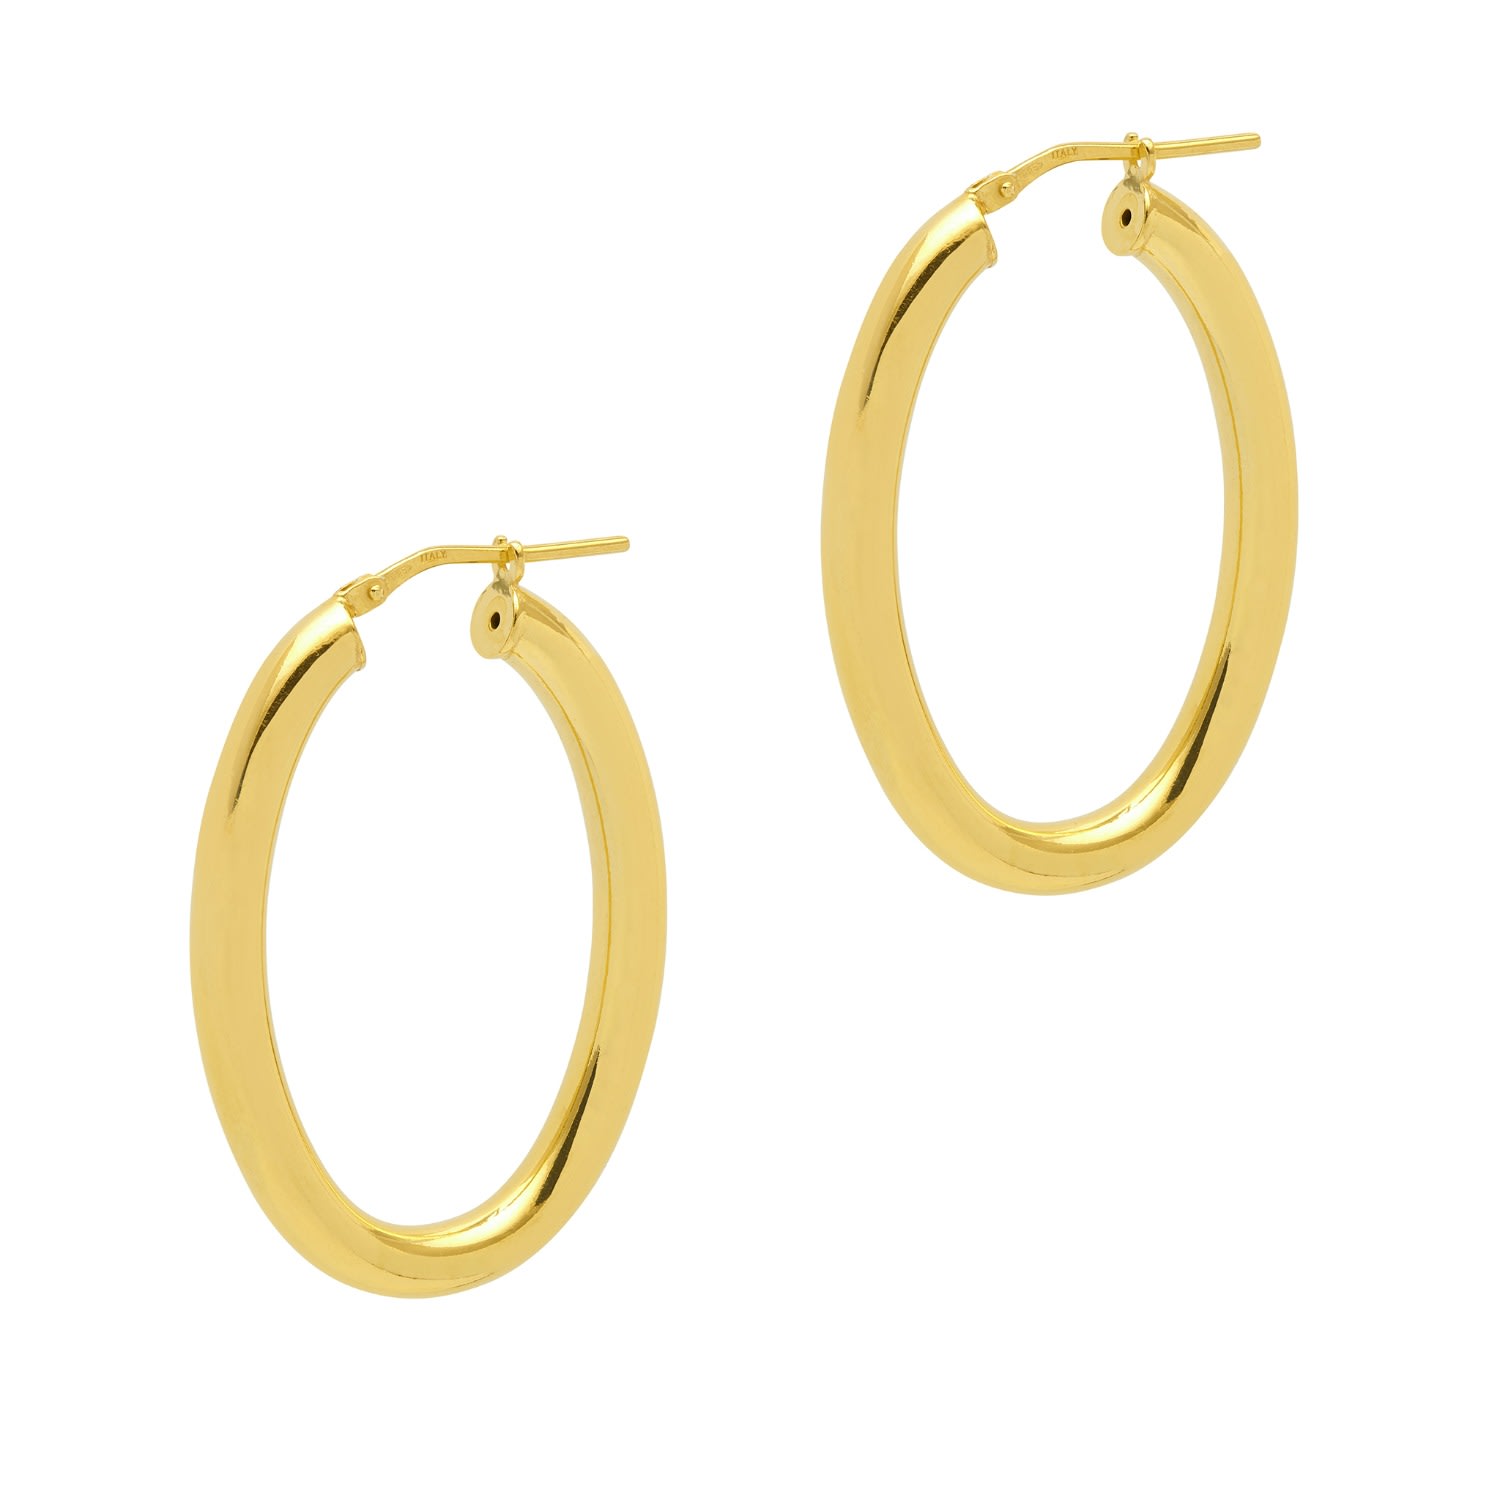 The Hoop Station Women's Oval Shaped Hoops - Gold